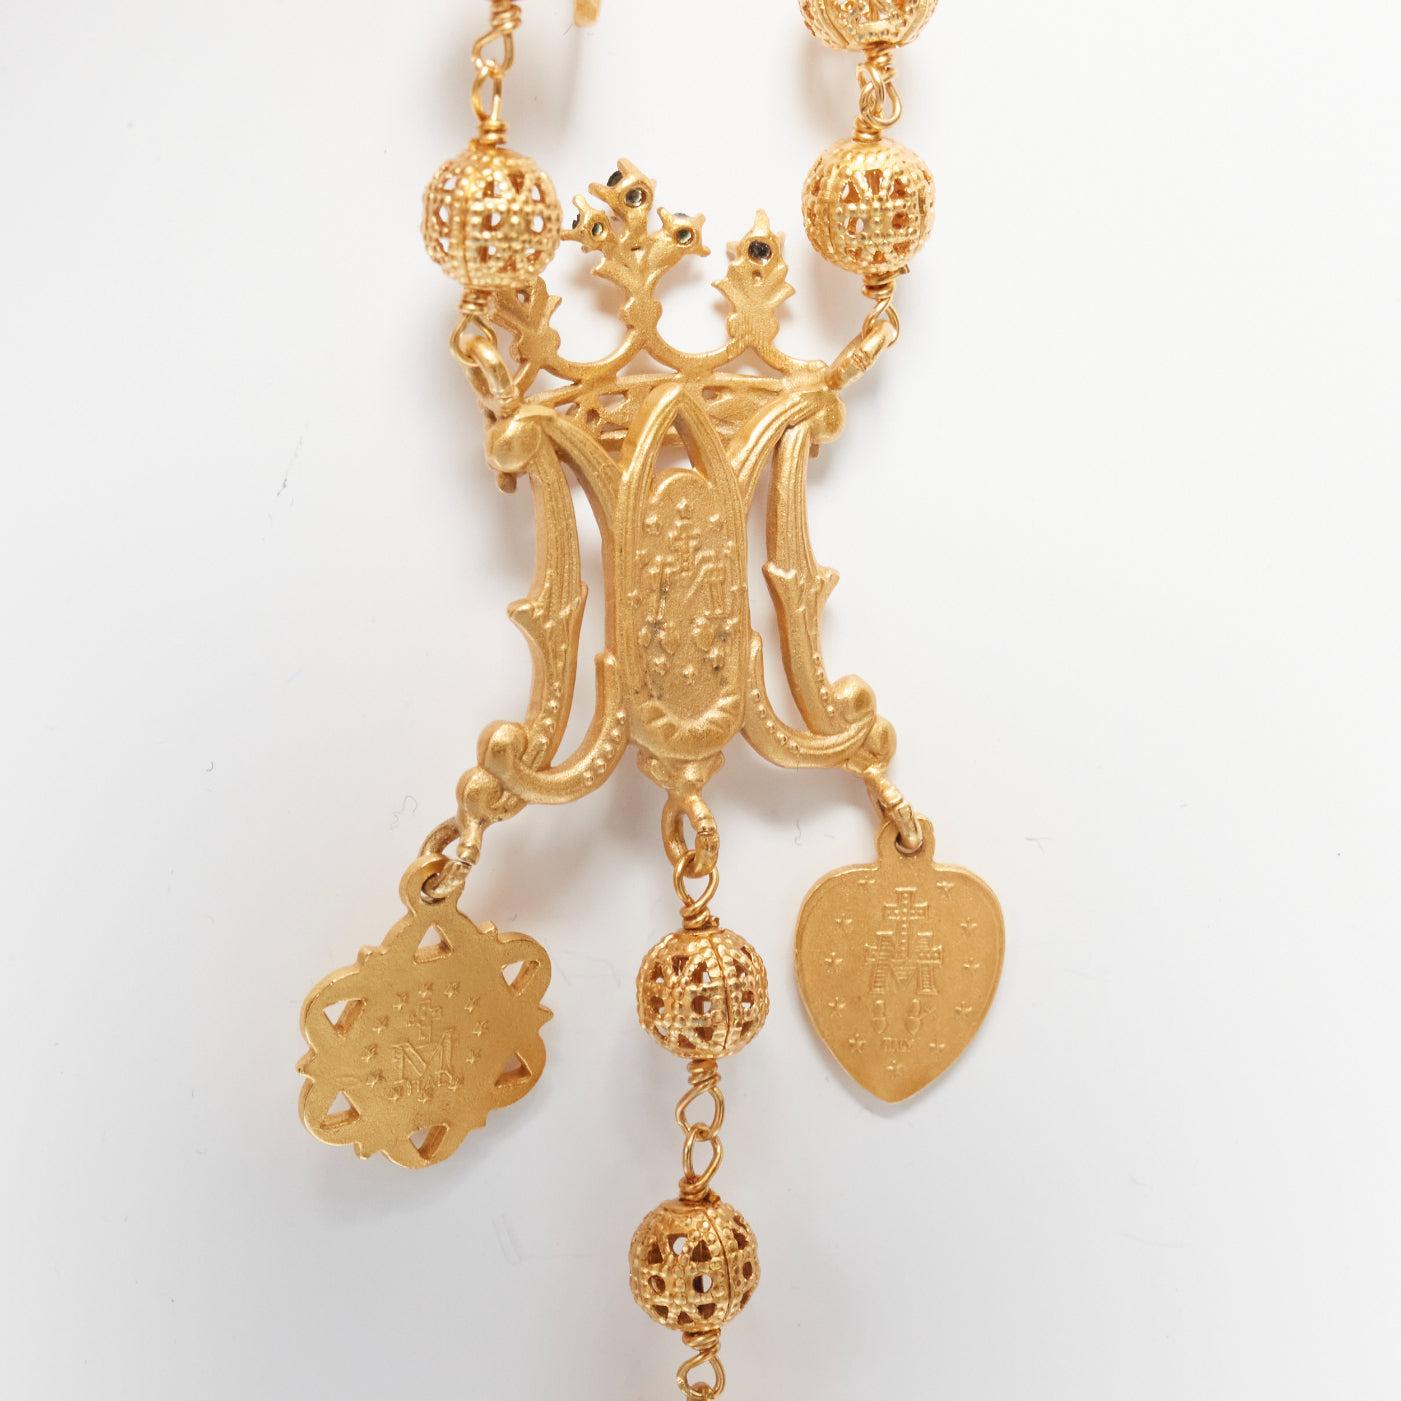 rare DOLCE GABBANA gold tone Jesus cross Saints coin charm long rosary necklace
Reference: TGAS/D00183
Brand: Dolce Gabbana
Designer: Domenico Dolce and Stefano Gabbana
Material: Metal
Color: Gold
Pattern: Barocco
Closure: Pull On
Made in: